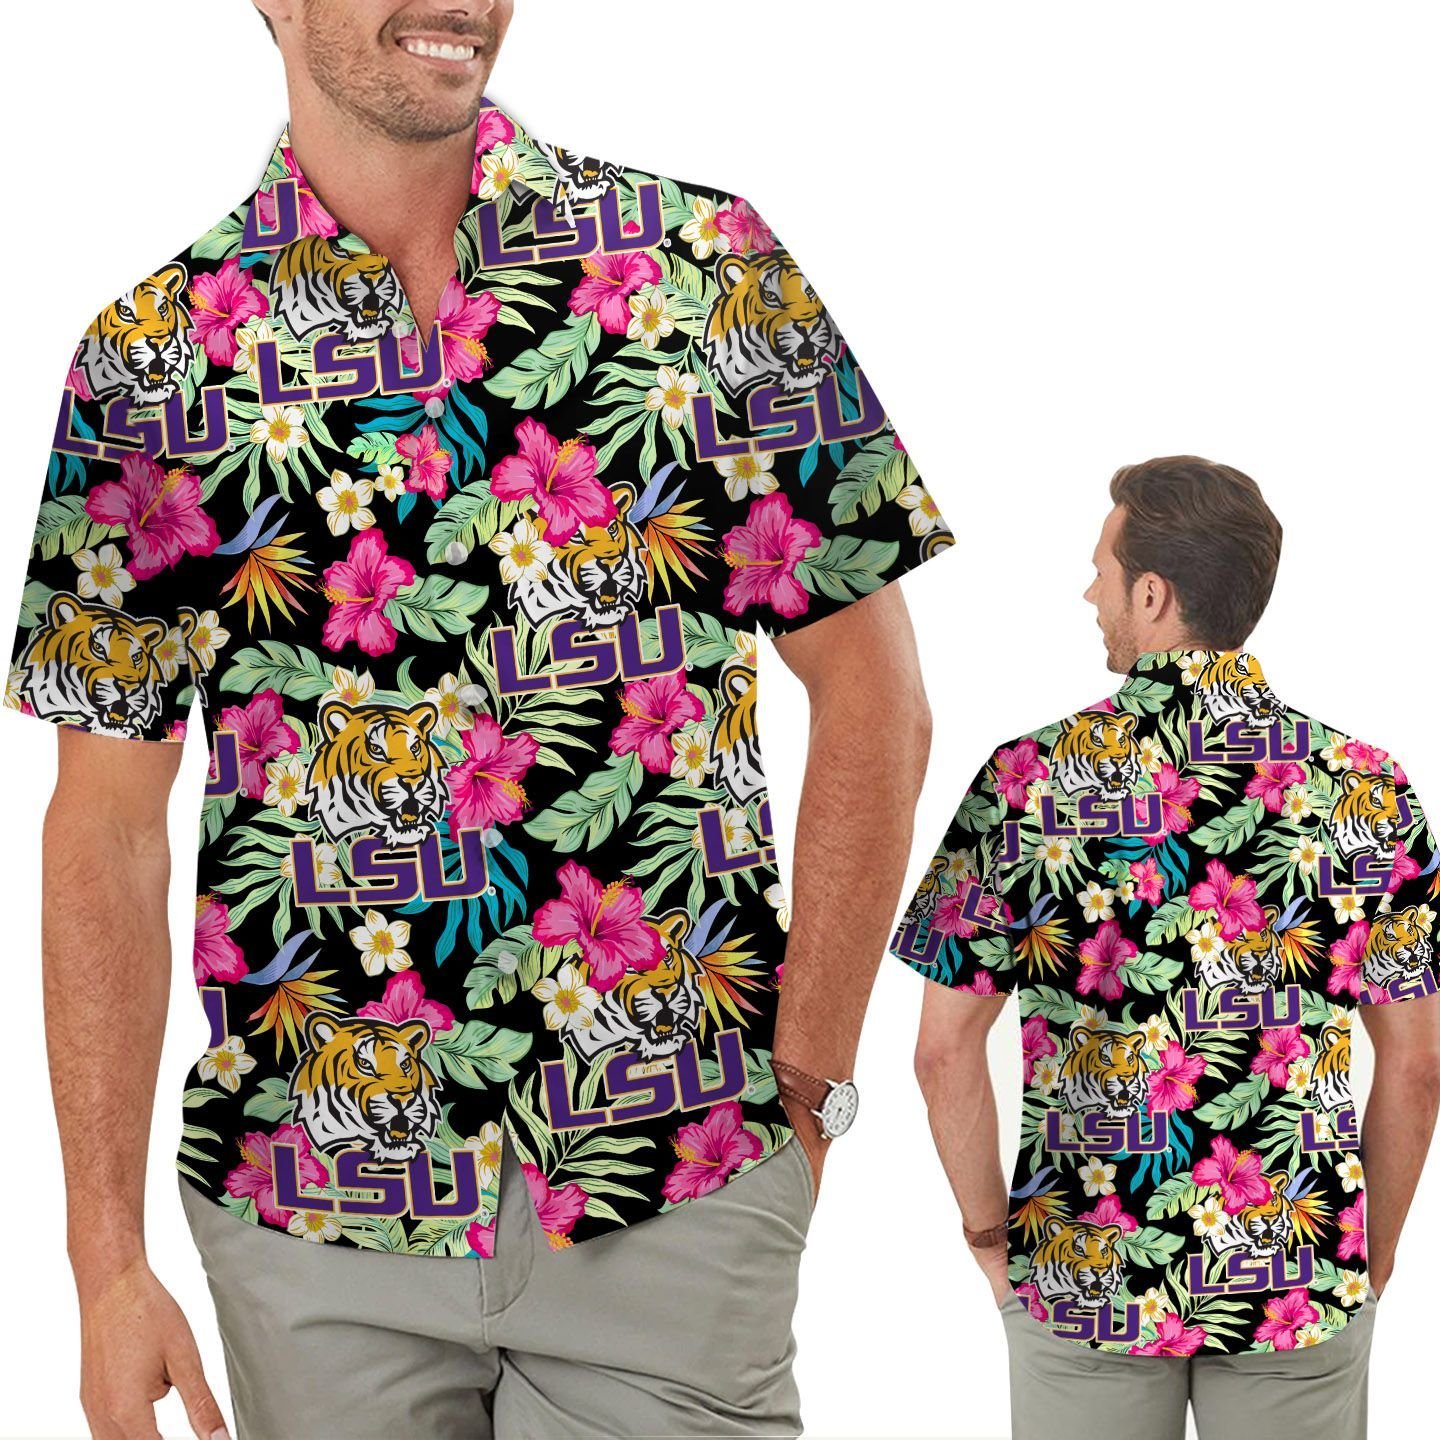 Lsu Tigers Hibiscus Short Sleeve Button Up Tropical Aloha Hawaiian Shirts For Men Women For Sport Lovers In Summer Louisiana State University